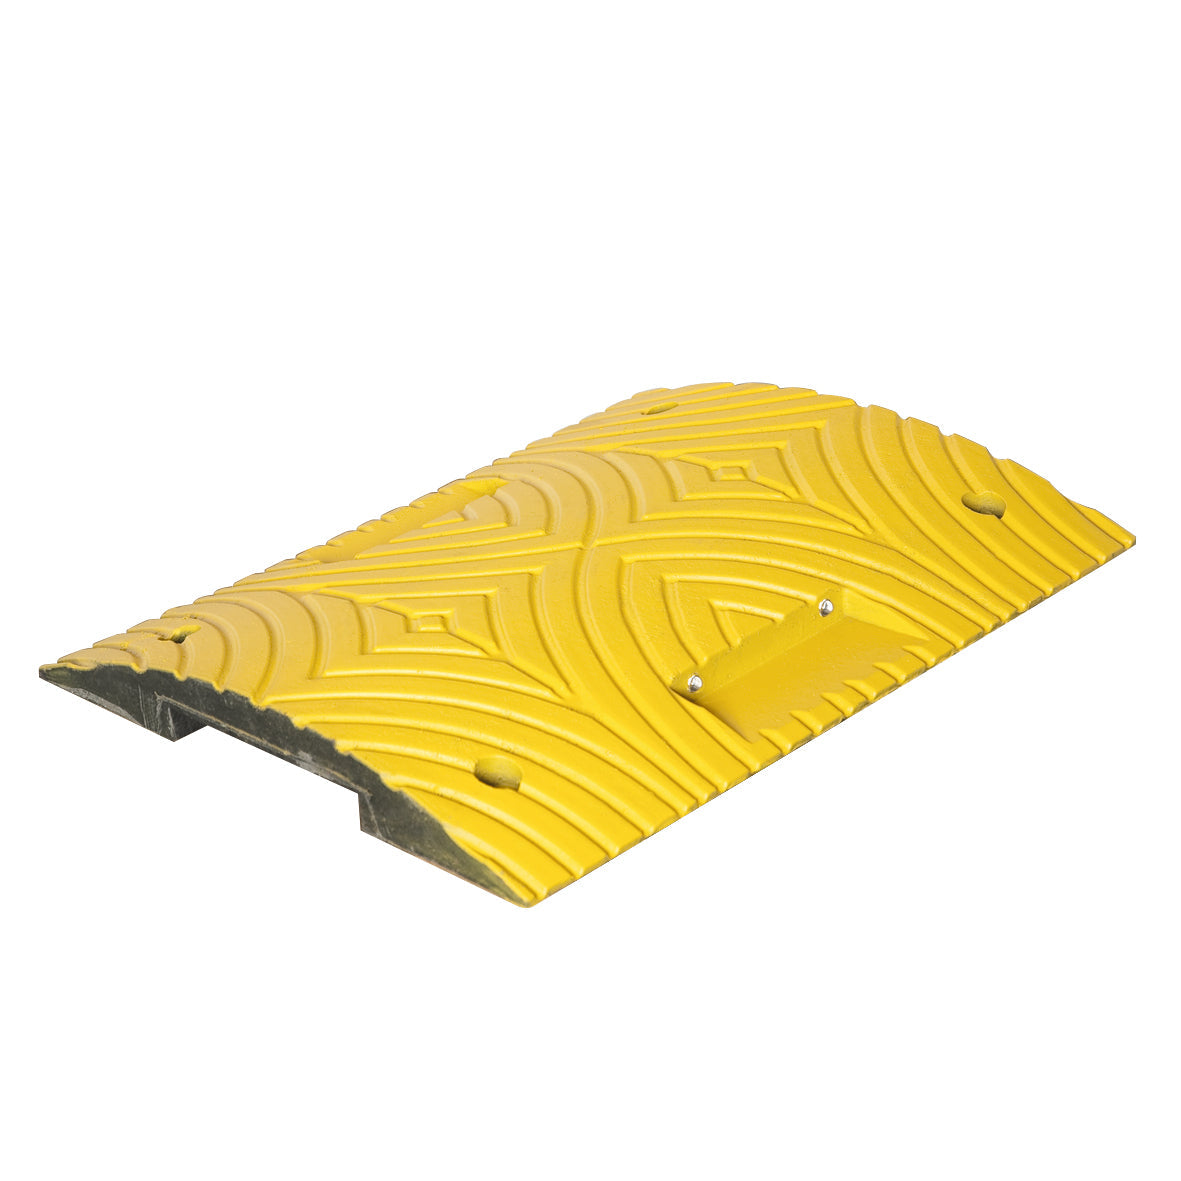 TopStop Eco 50mm yellow mid-section